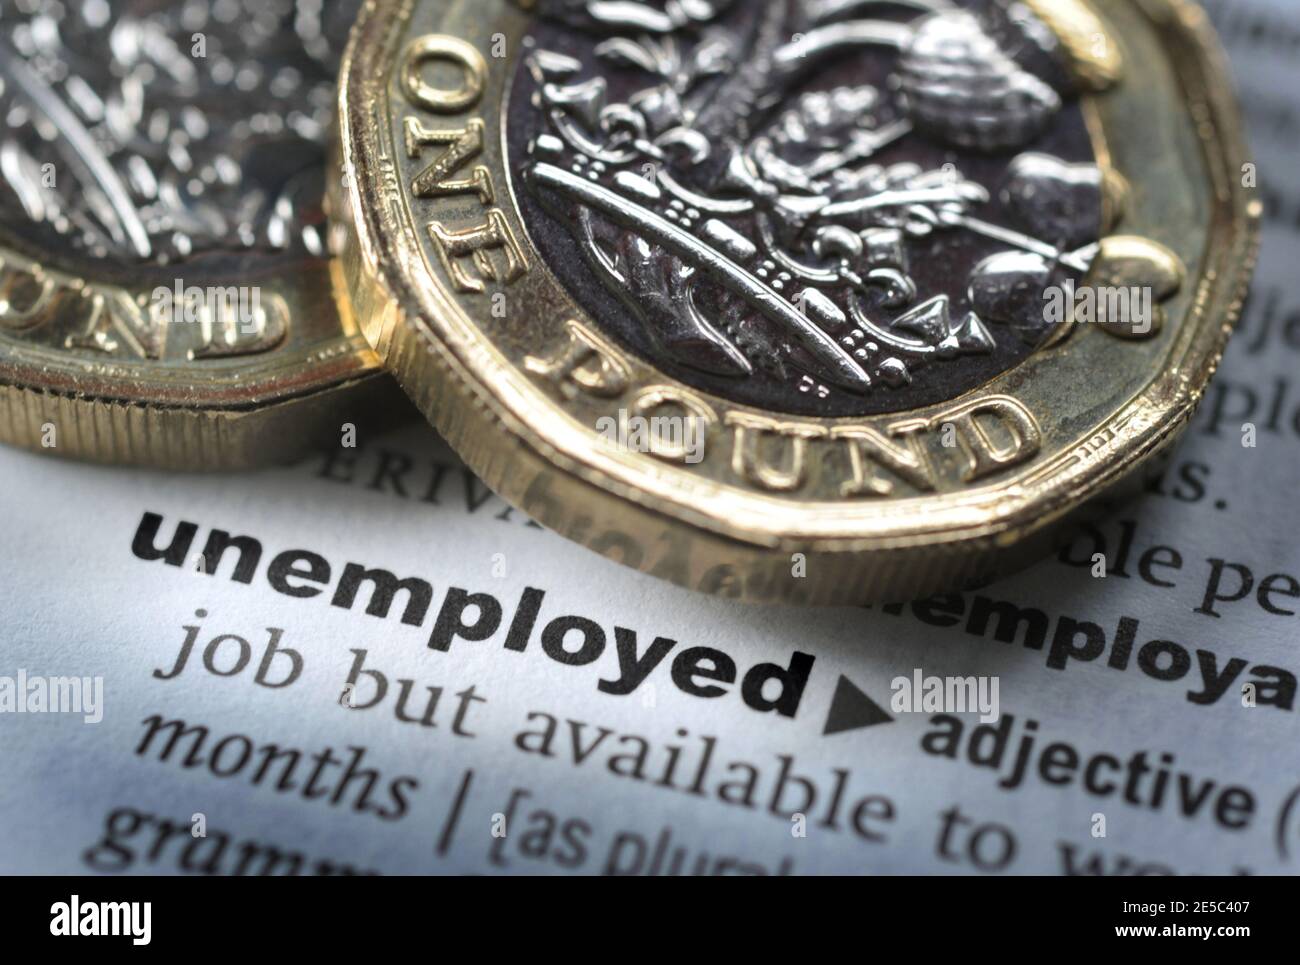 DICTIONARY DEFINITION OF WORD UNEMPLOYED WITH ONE POUND COINS RE COVID 19 CORONAVIRUS WORKERS FURLOUGHED FURLOUGH ETC UK Stock Photo